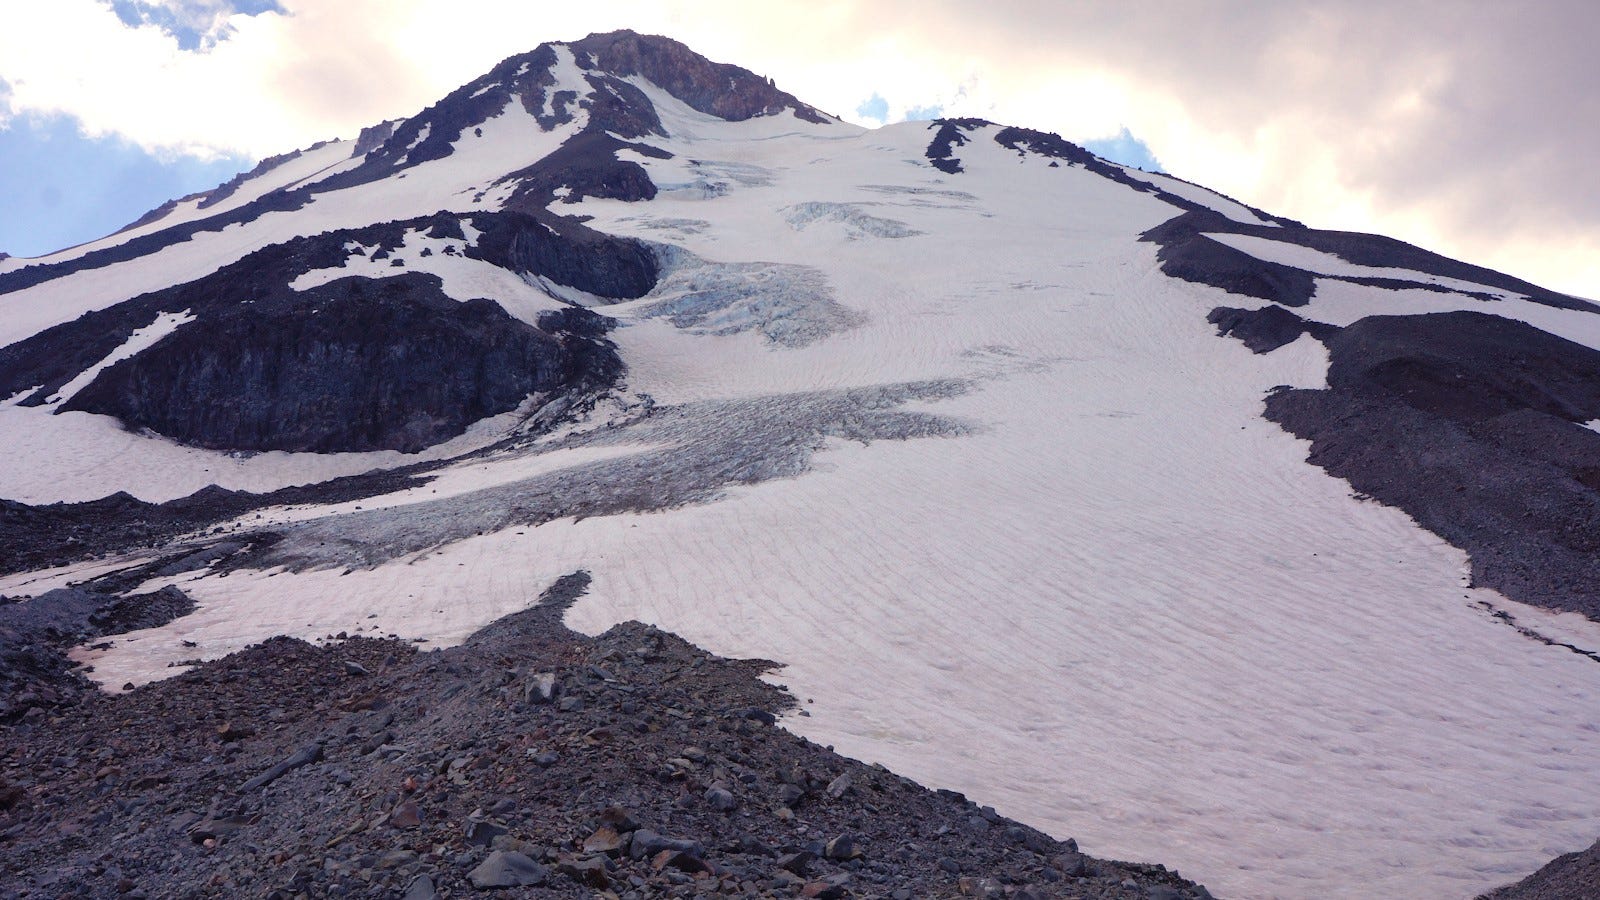 The Hotlum Glacier is located on the northeast side of Mt. Shasta.